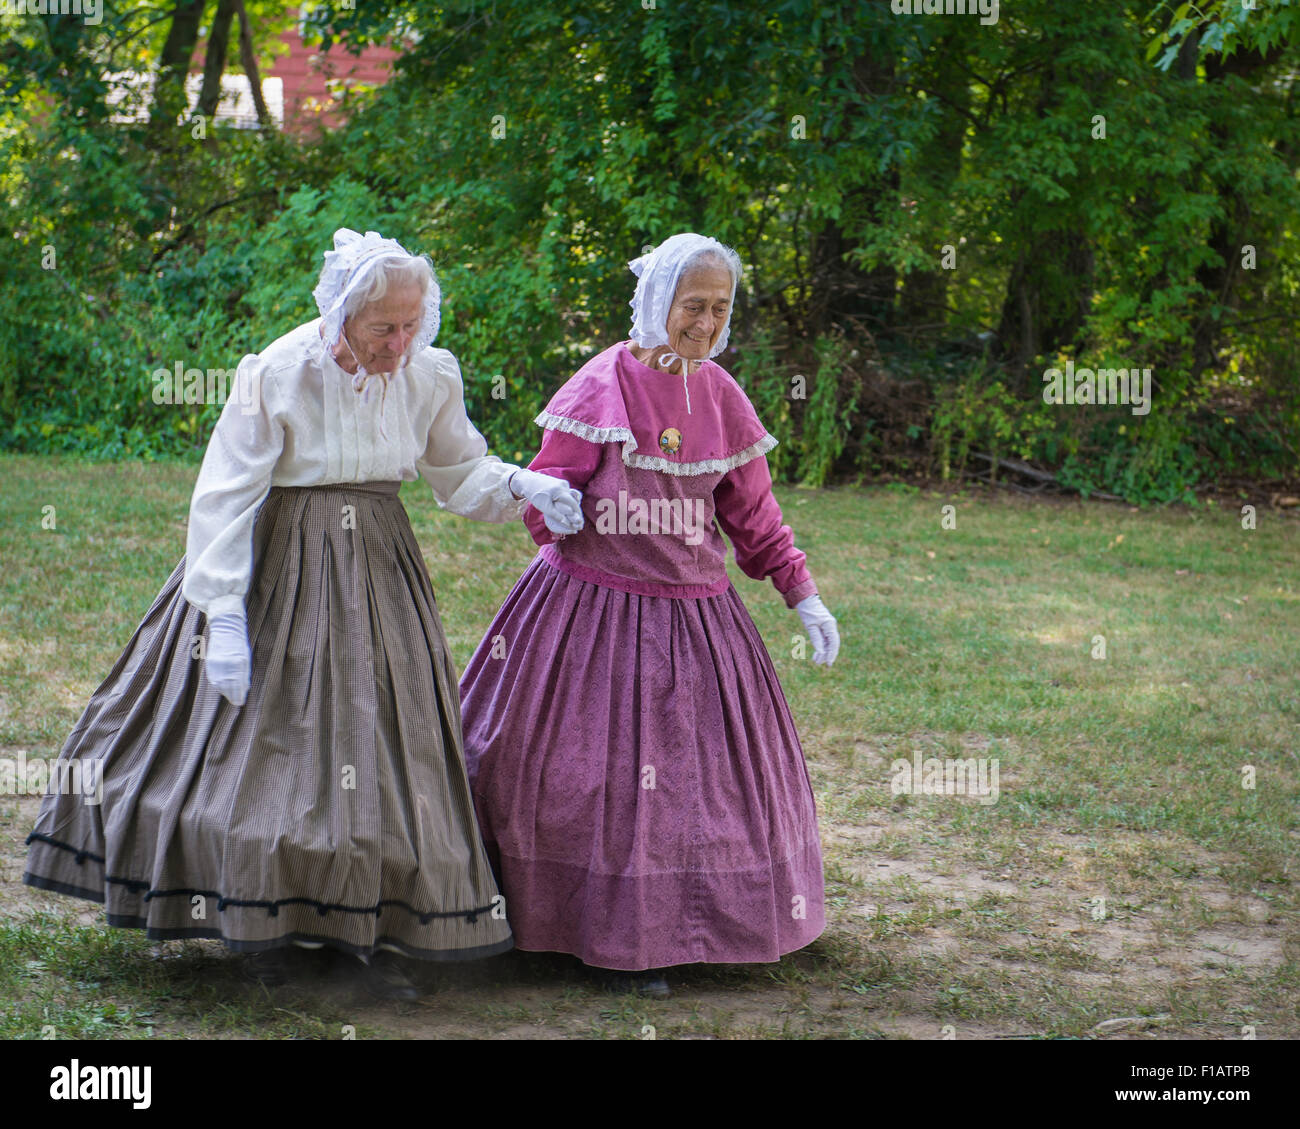 Old Bethpage, New York, USA. 30th August, 2015. L-R, identical twin sisters JULIETTE FOX of Hicksville, and PATRICIA JOSEPH of College Point, wearing Civil War era style long hoop skirt clothing, are member of the Old Bethpage Village Dancers which danced throughout the Old Time Music Weekend at Old Bethpage Village Restoration, where popular music of the American Civil War period was performed, and visitors learned traditional 1800's contradances. Credit:  Ann E Parry/Alamy Live News Stock Photo